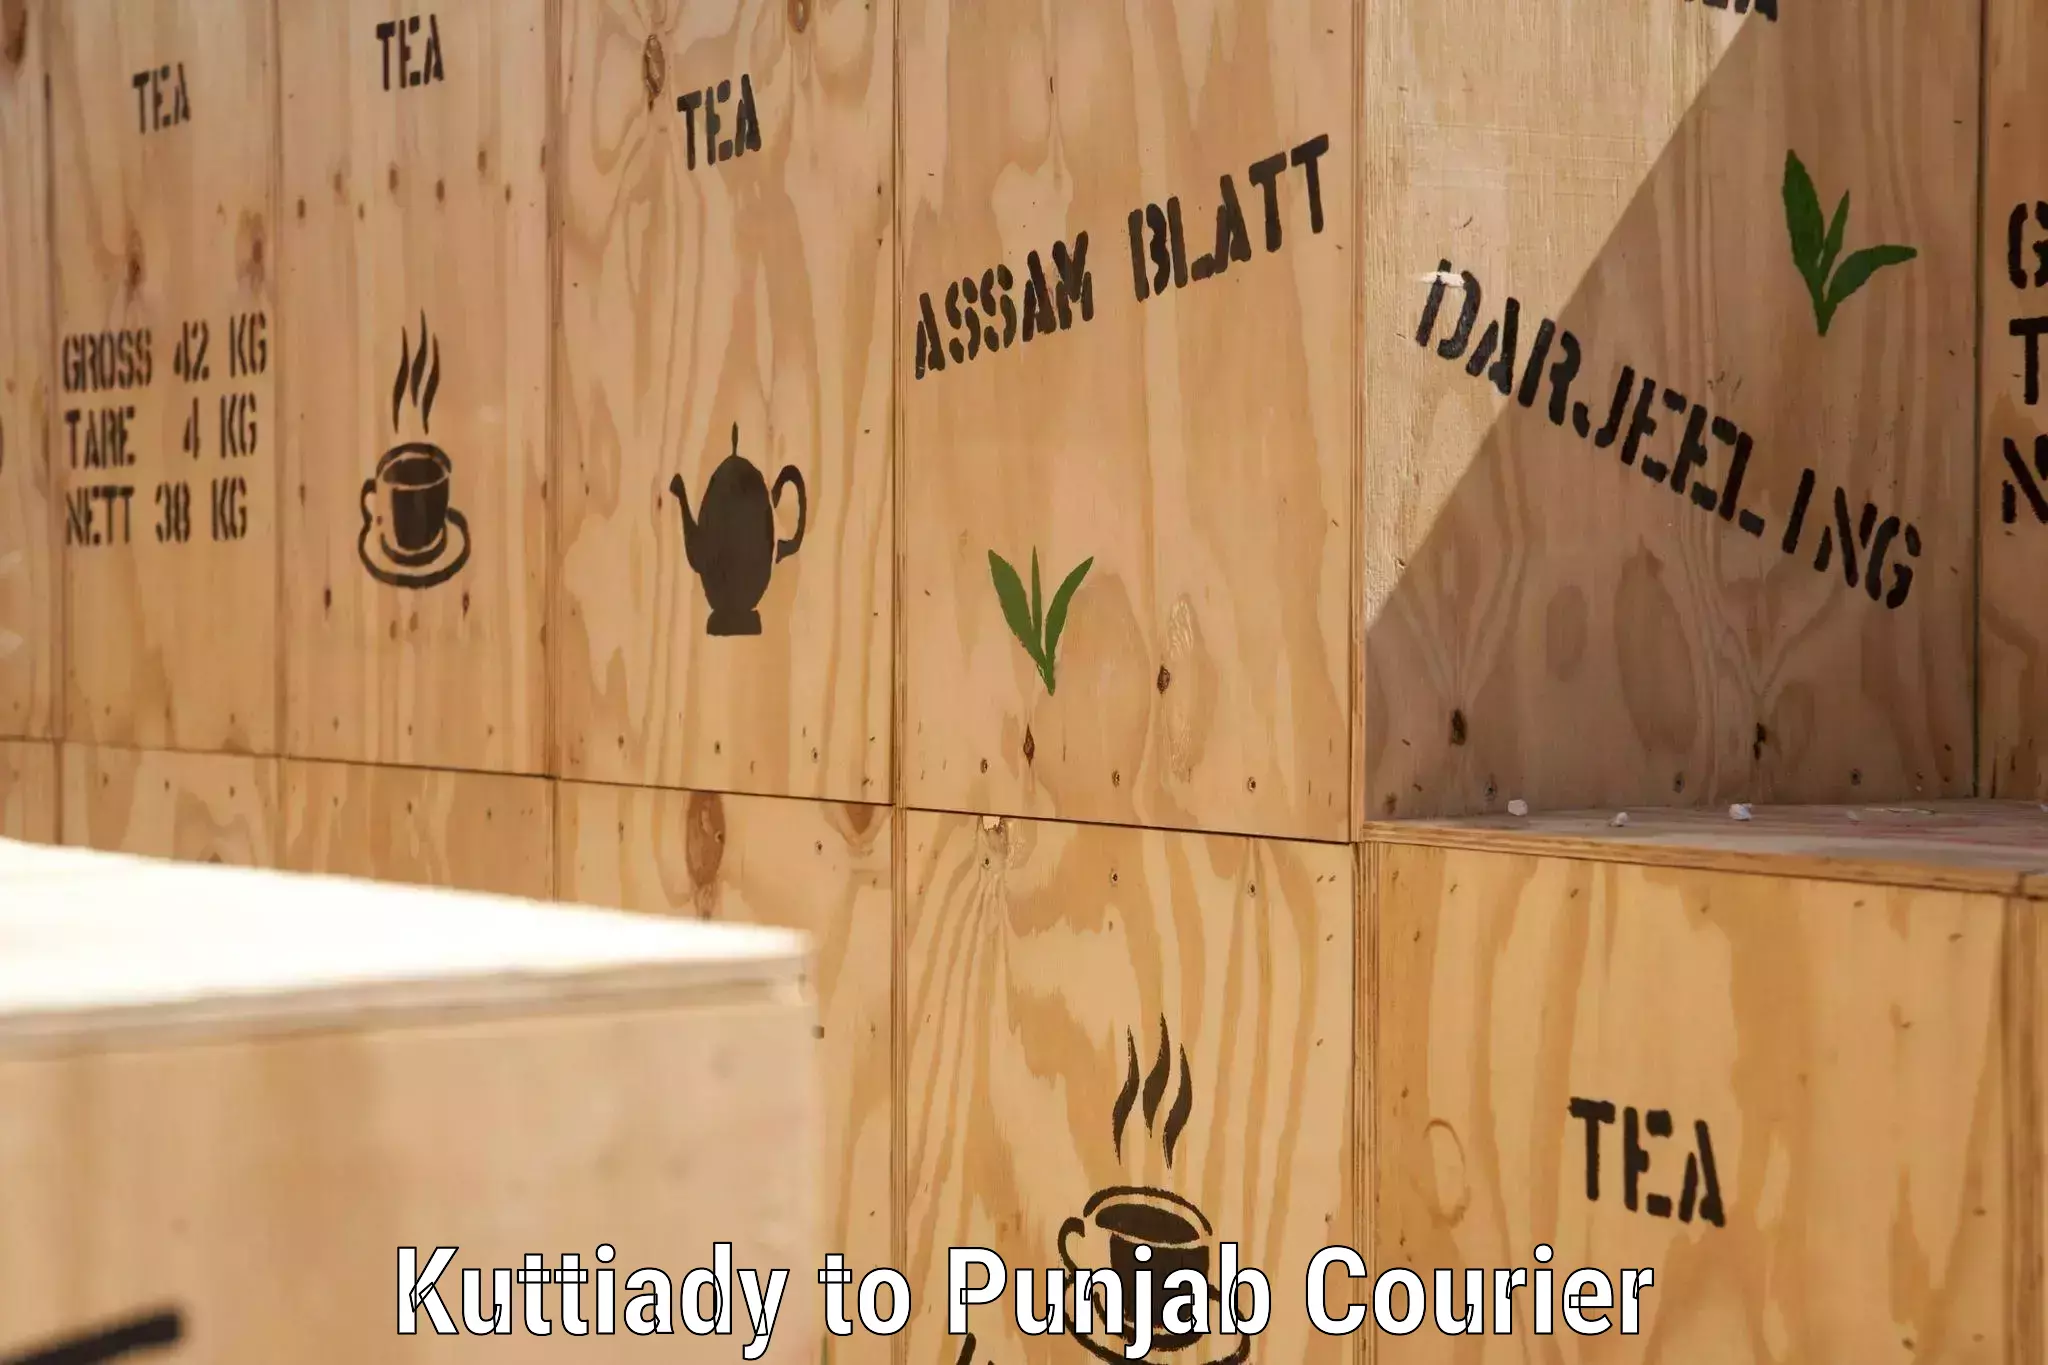 Parcel handling and care Kuttiady to Faridkot